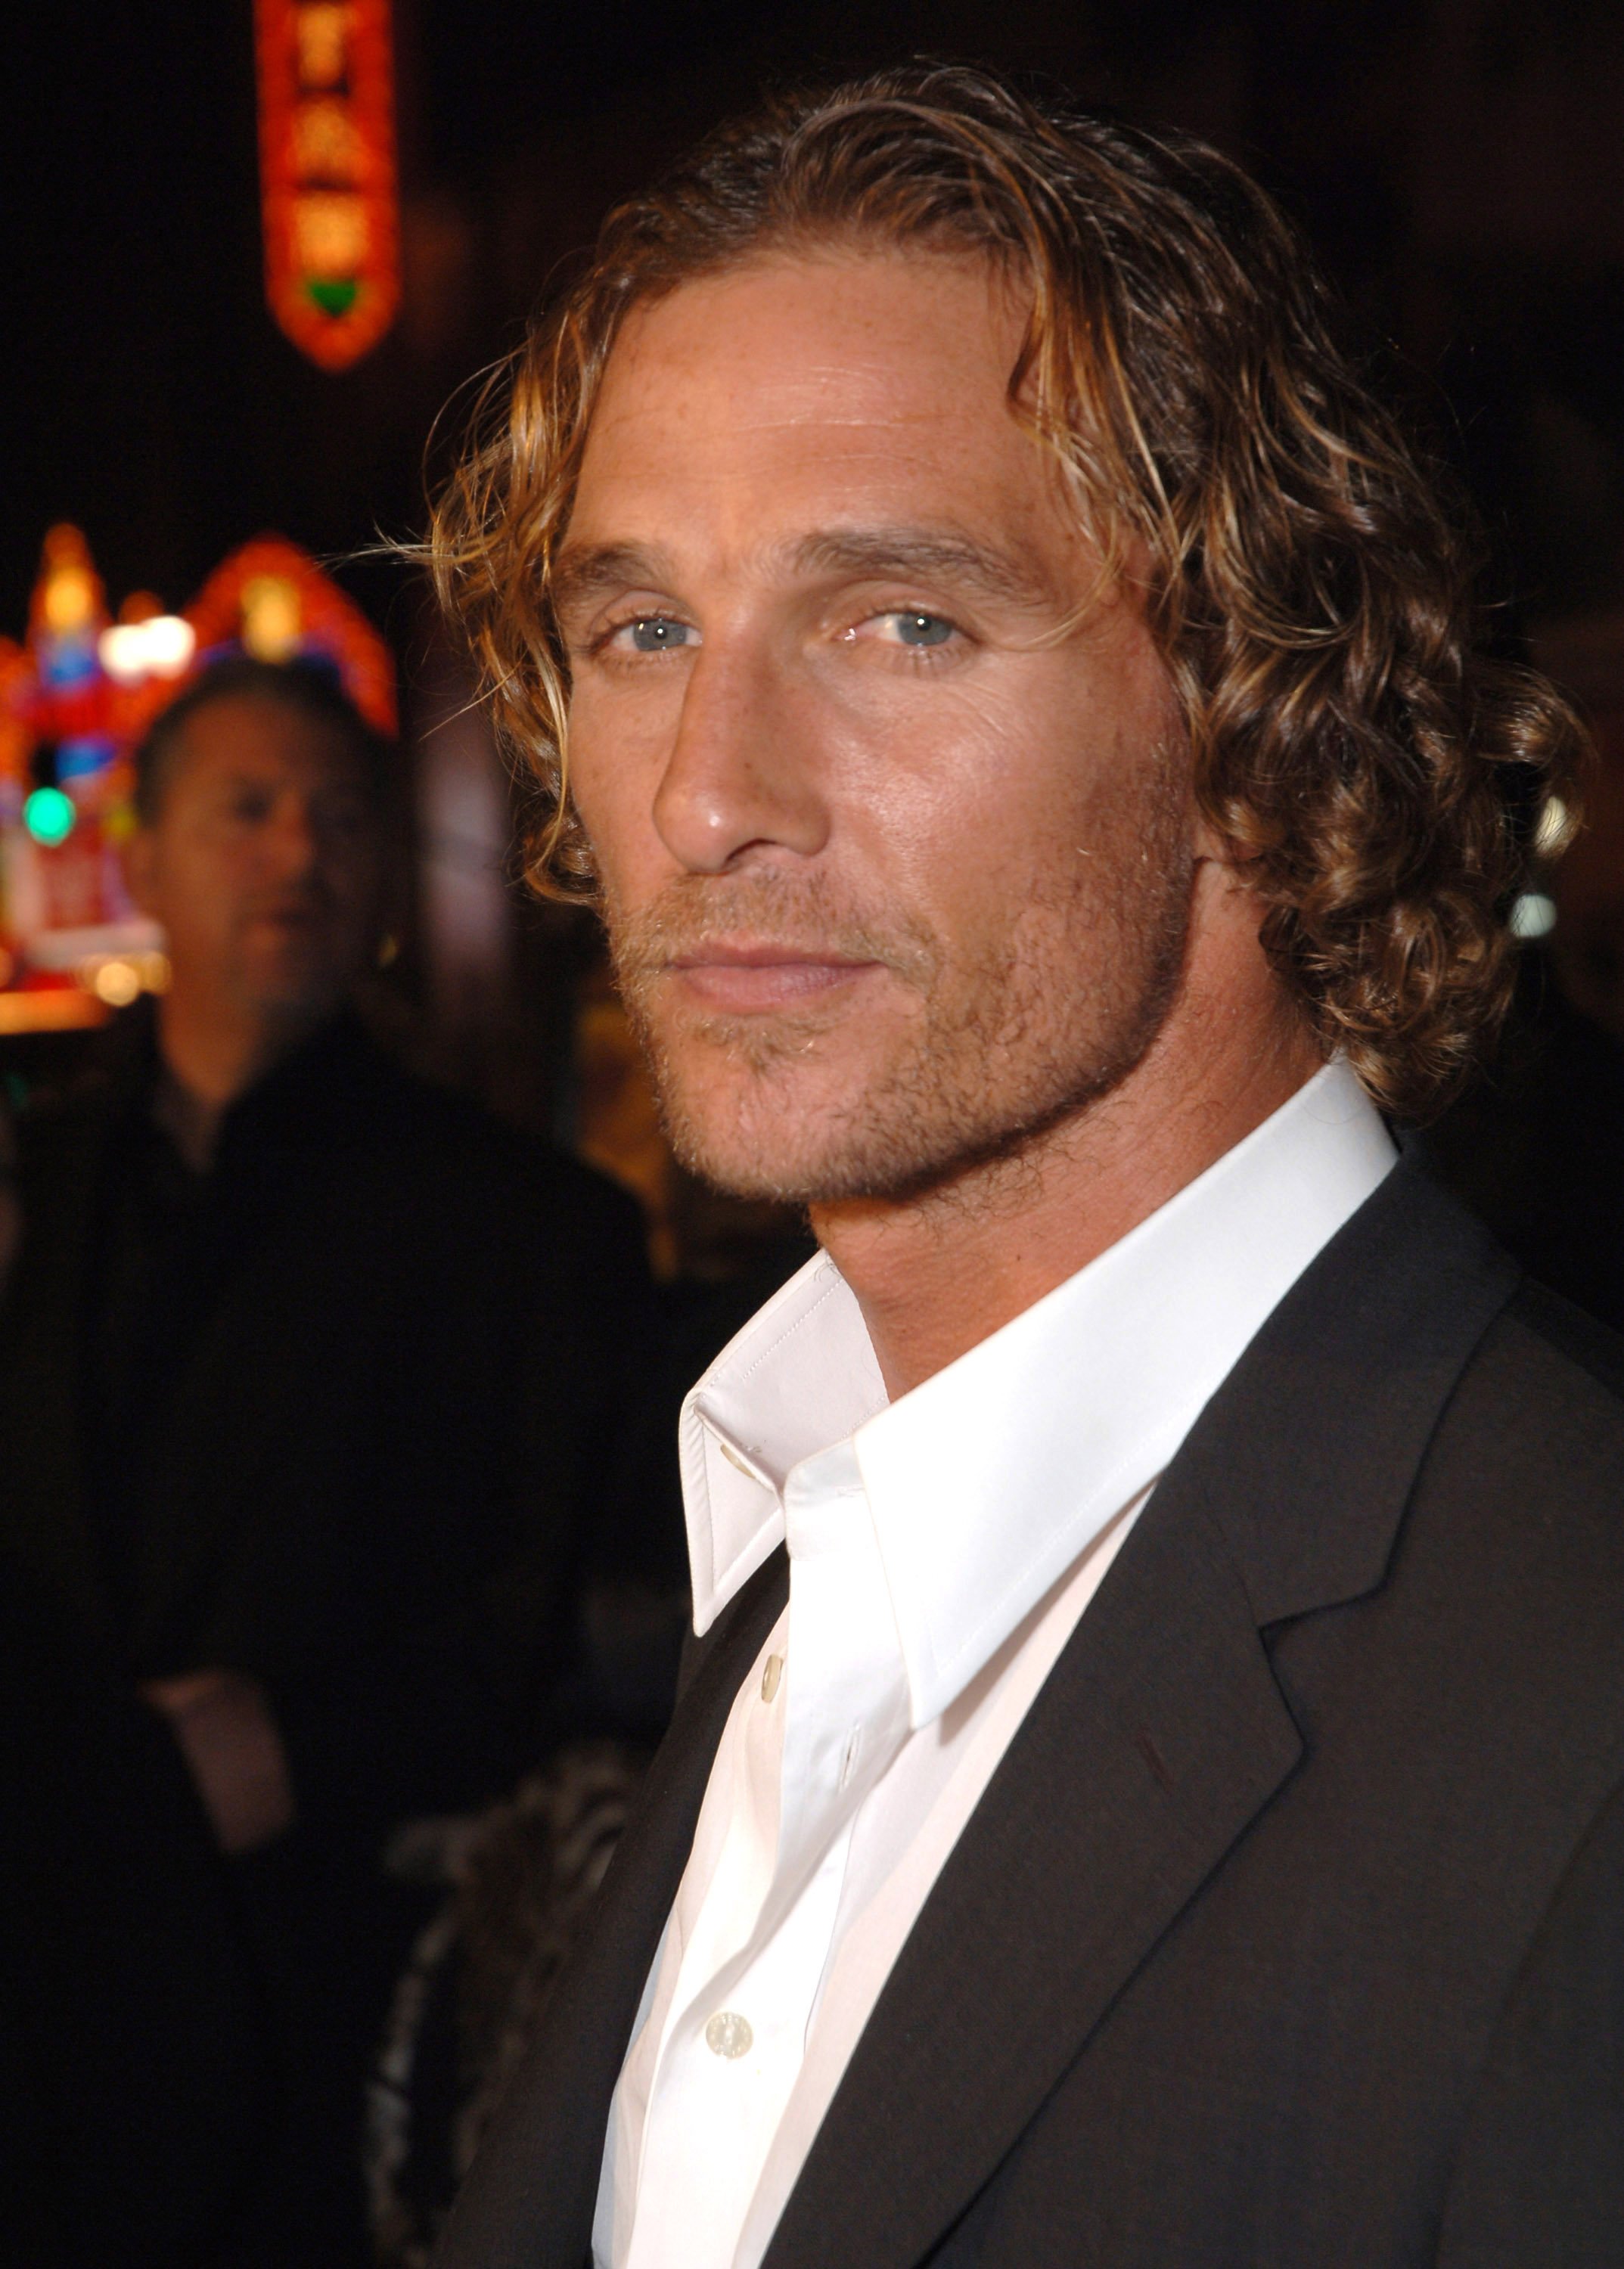 Actor Matthew McConaughey at a premiere in Los Angeles, California, 2006. | Source: Getty Images